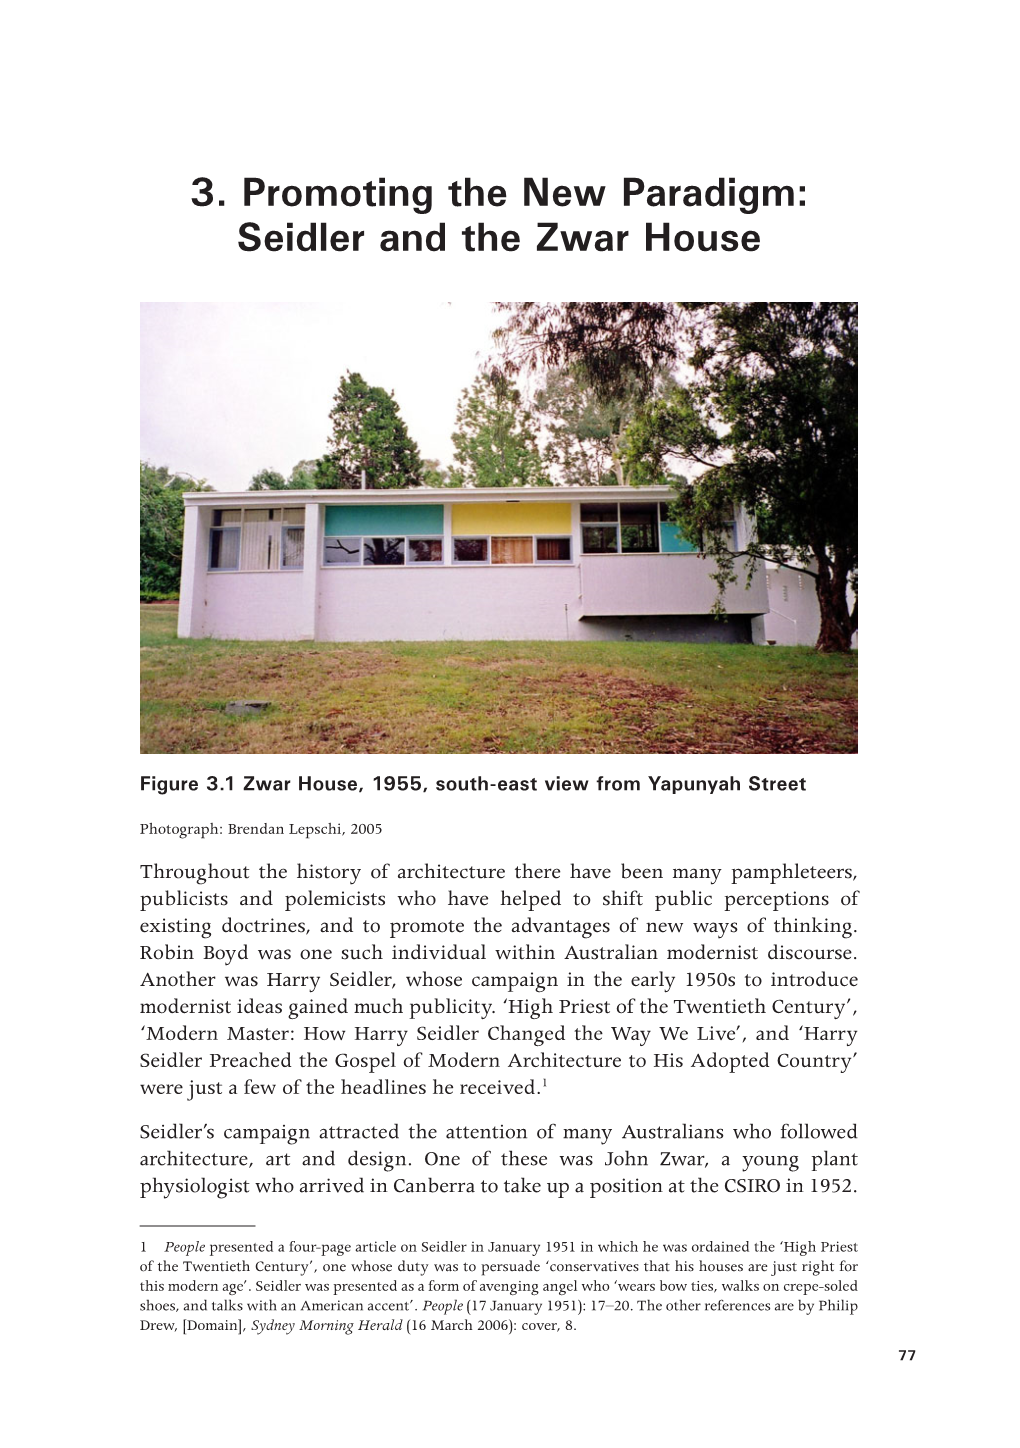 3. Promoting the New Paradigm: Seidler and the Zwar House